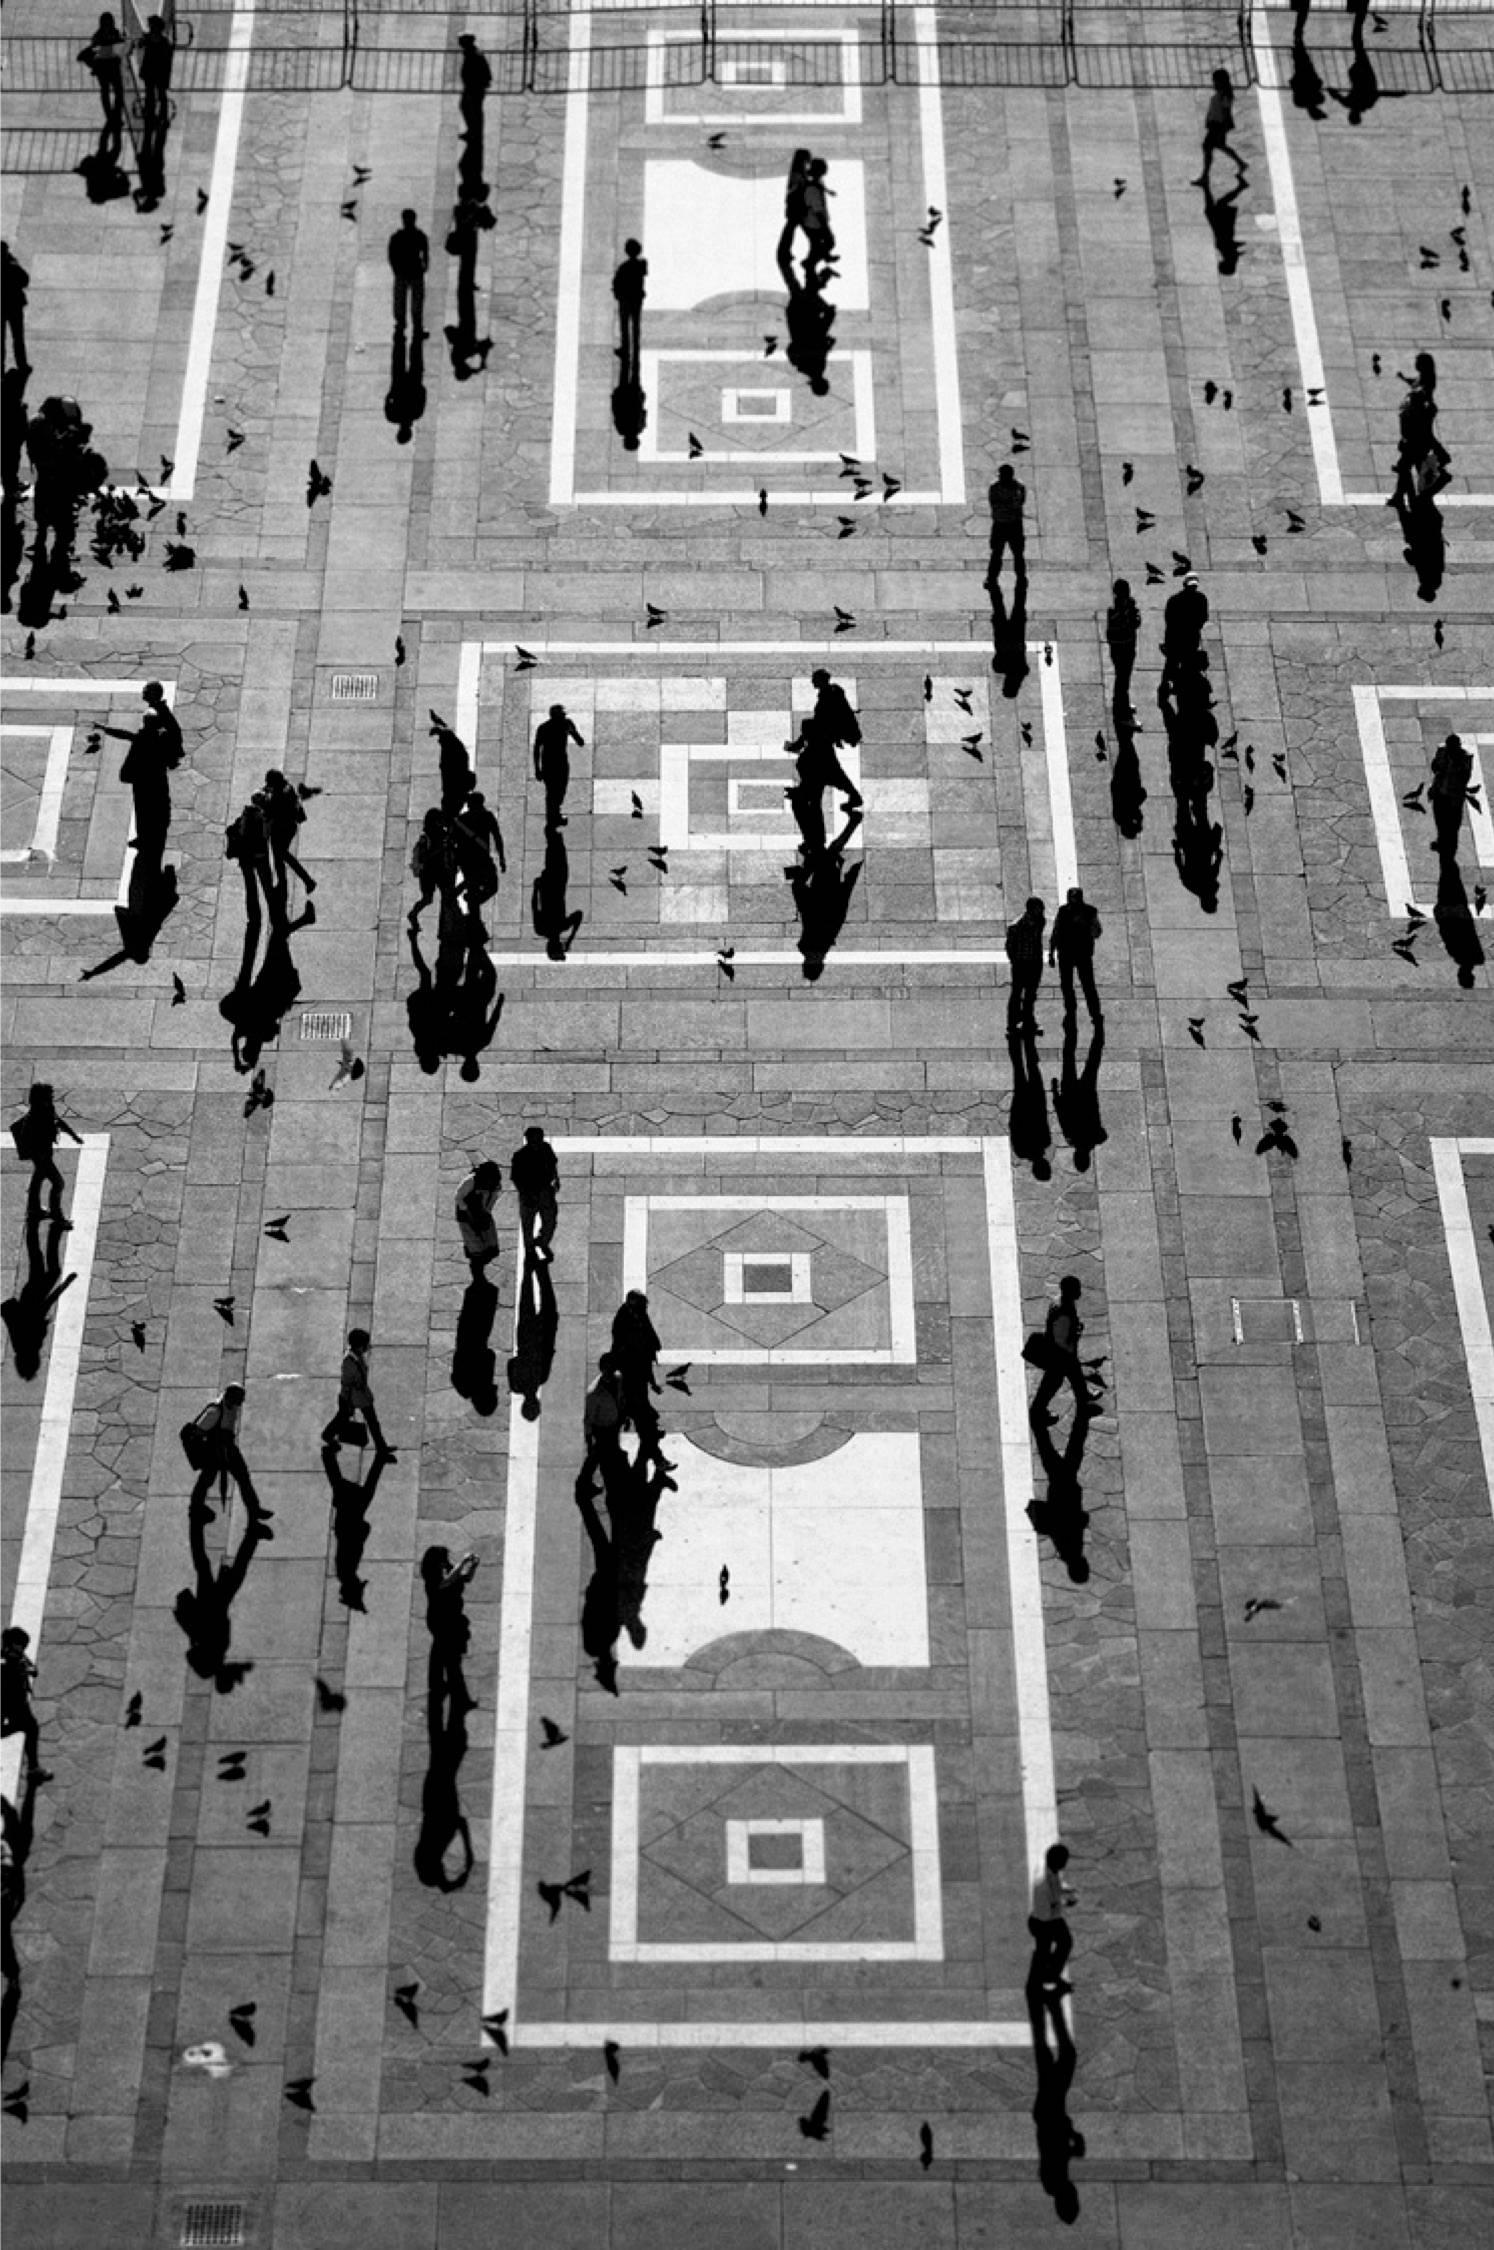 Guilherme Licurgo Black and White Photograph - People, Milan. From the Mundo du sombras series 